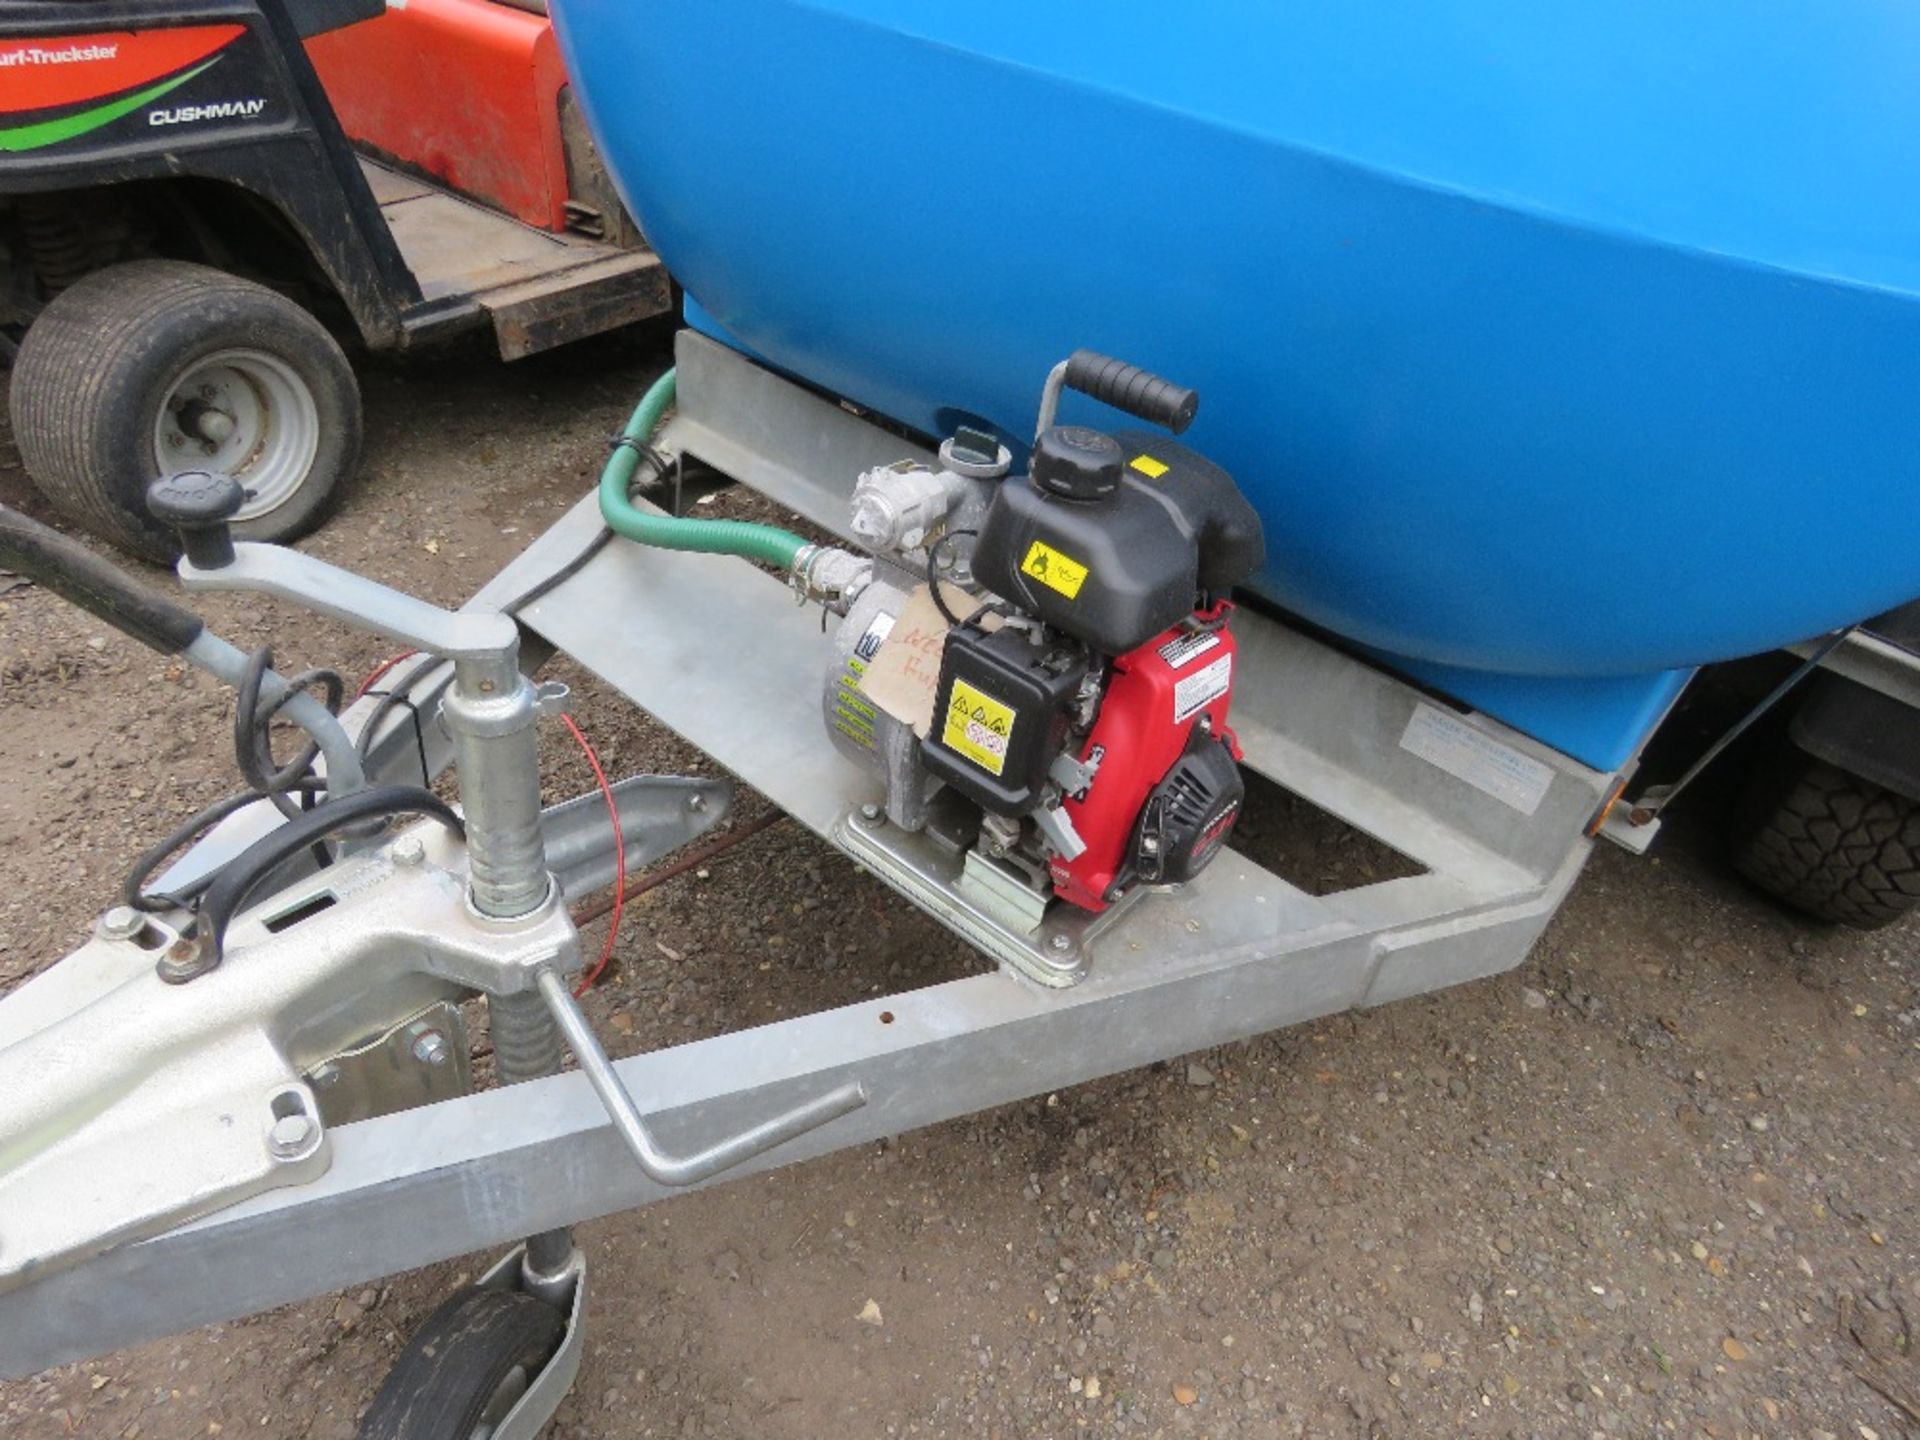 TRAILER ENGINEERING SINGLE AXLED WATER BOWSER WITH HONDA WATER PUMP. OWNER DOWNSIZING SO SURPLUS TO - Image 4 of 7